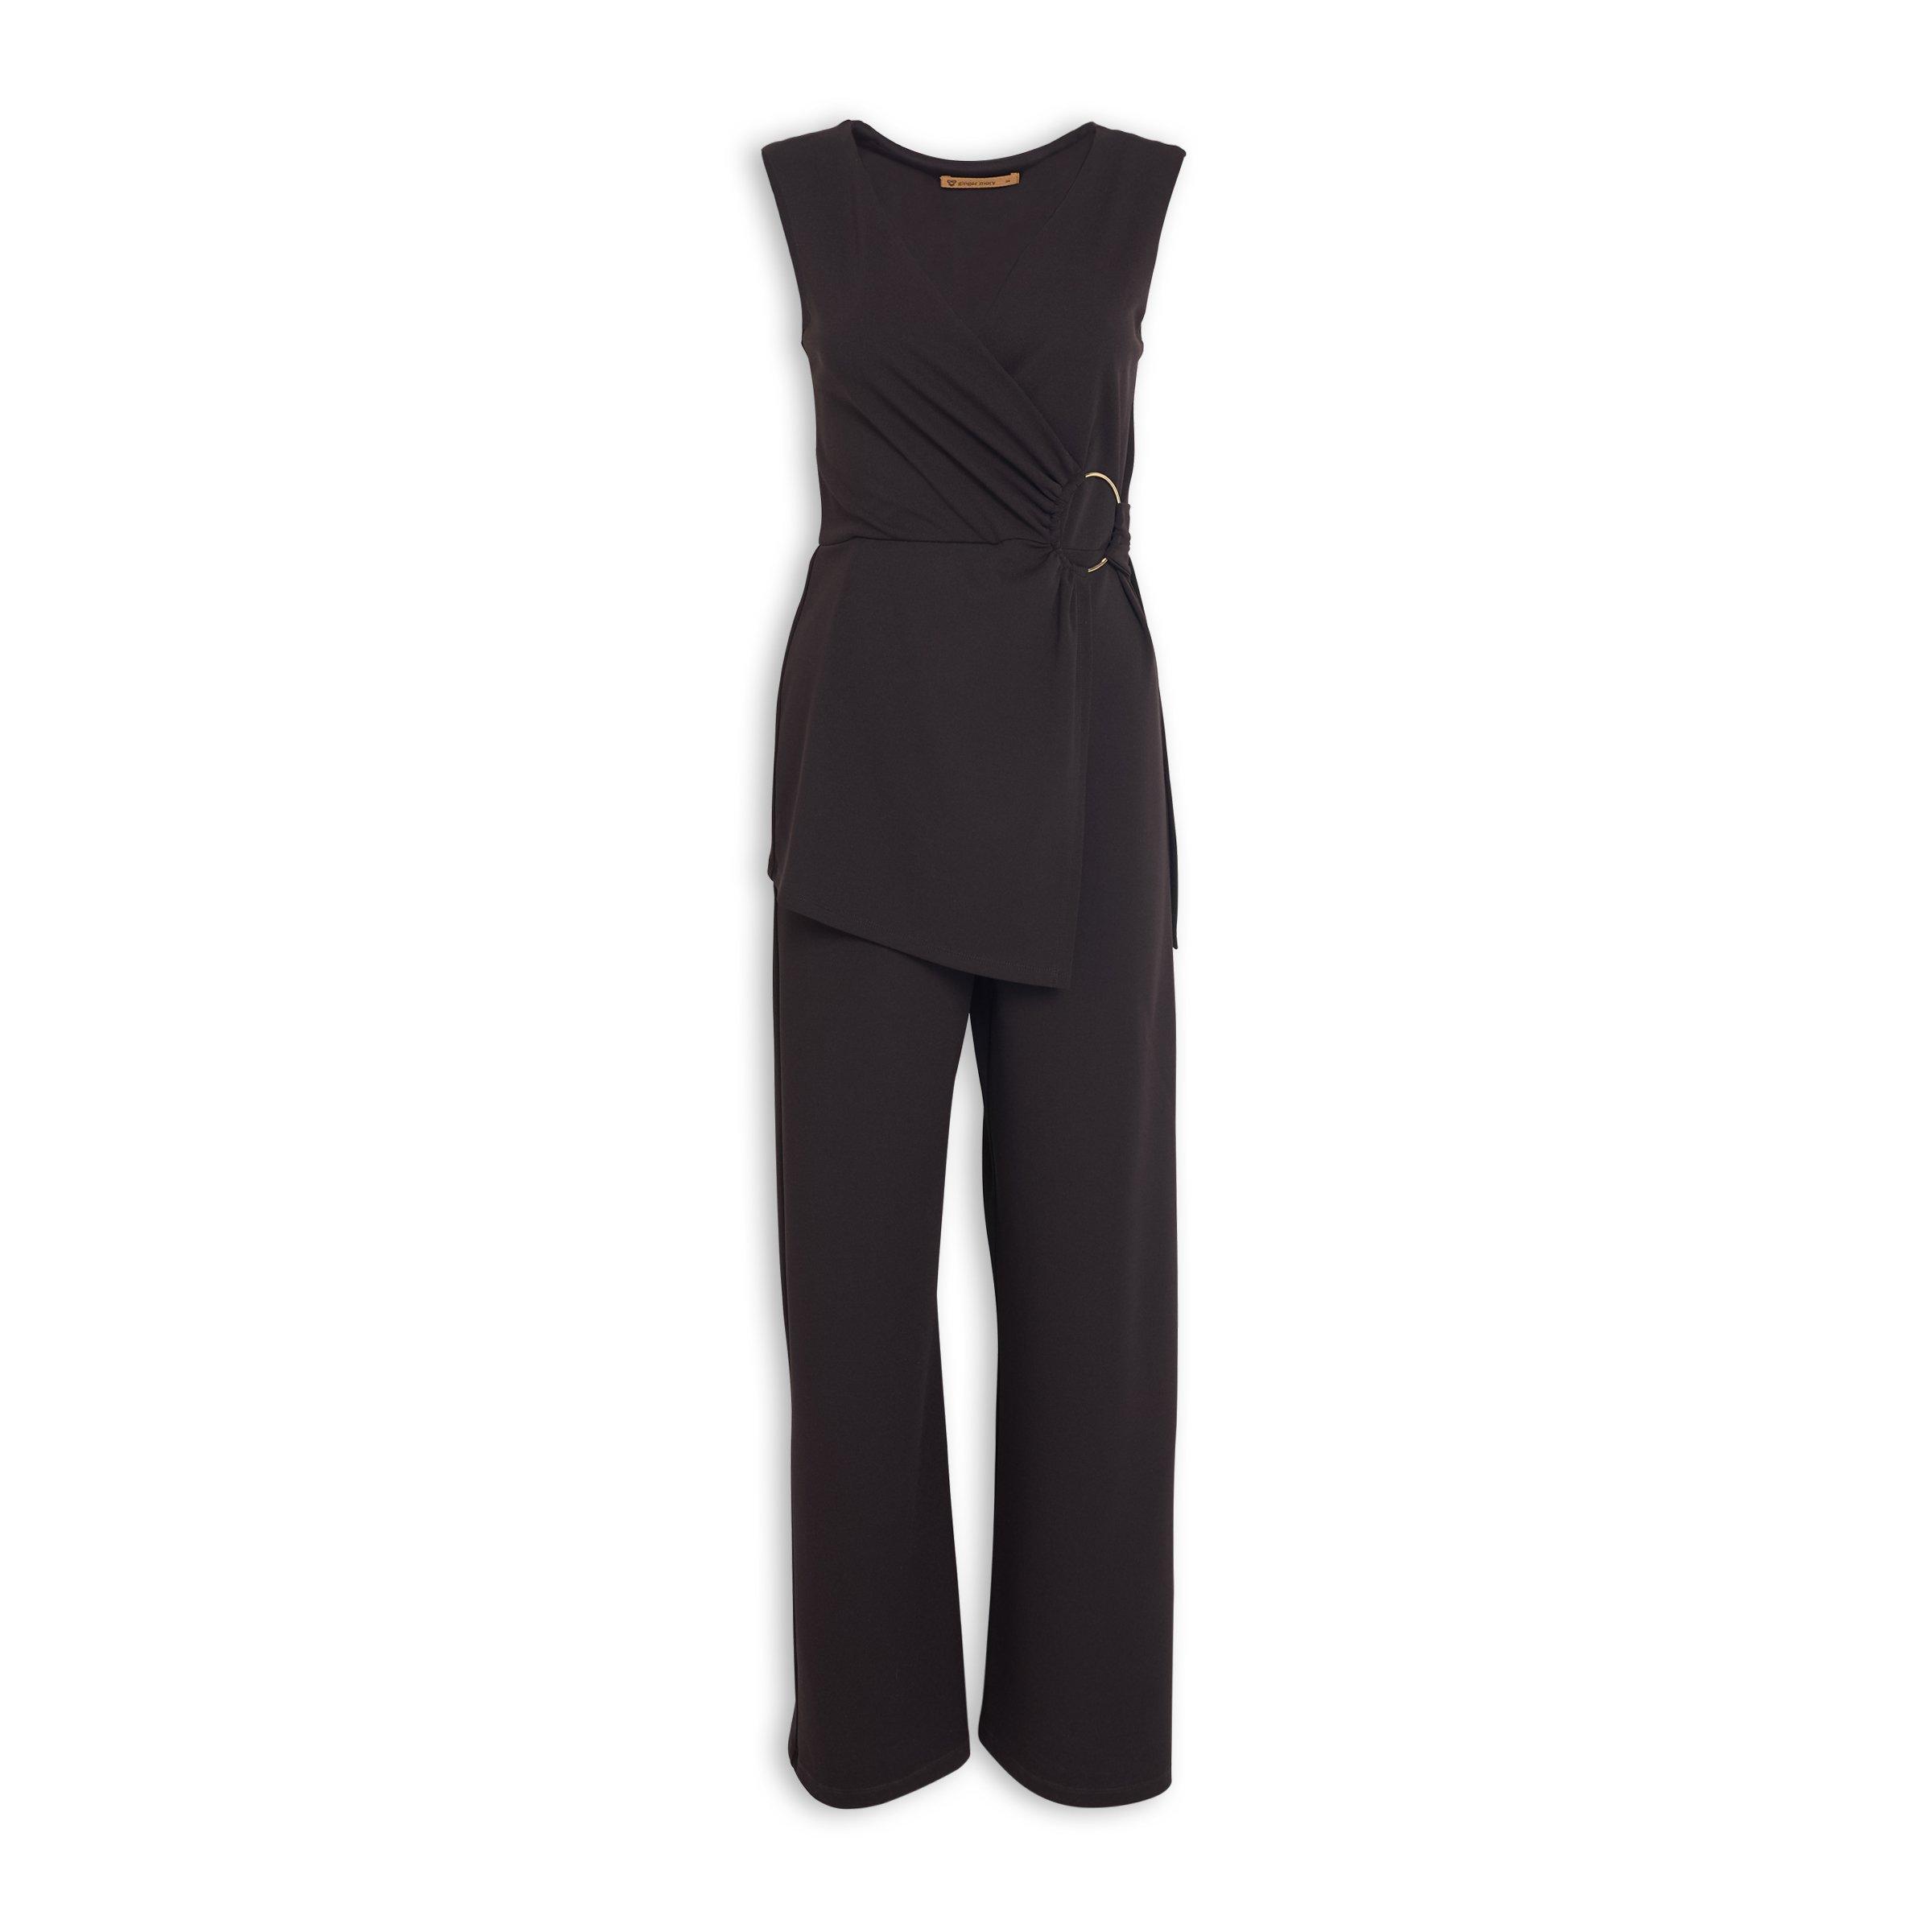 elsie and fred jumpsuit